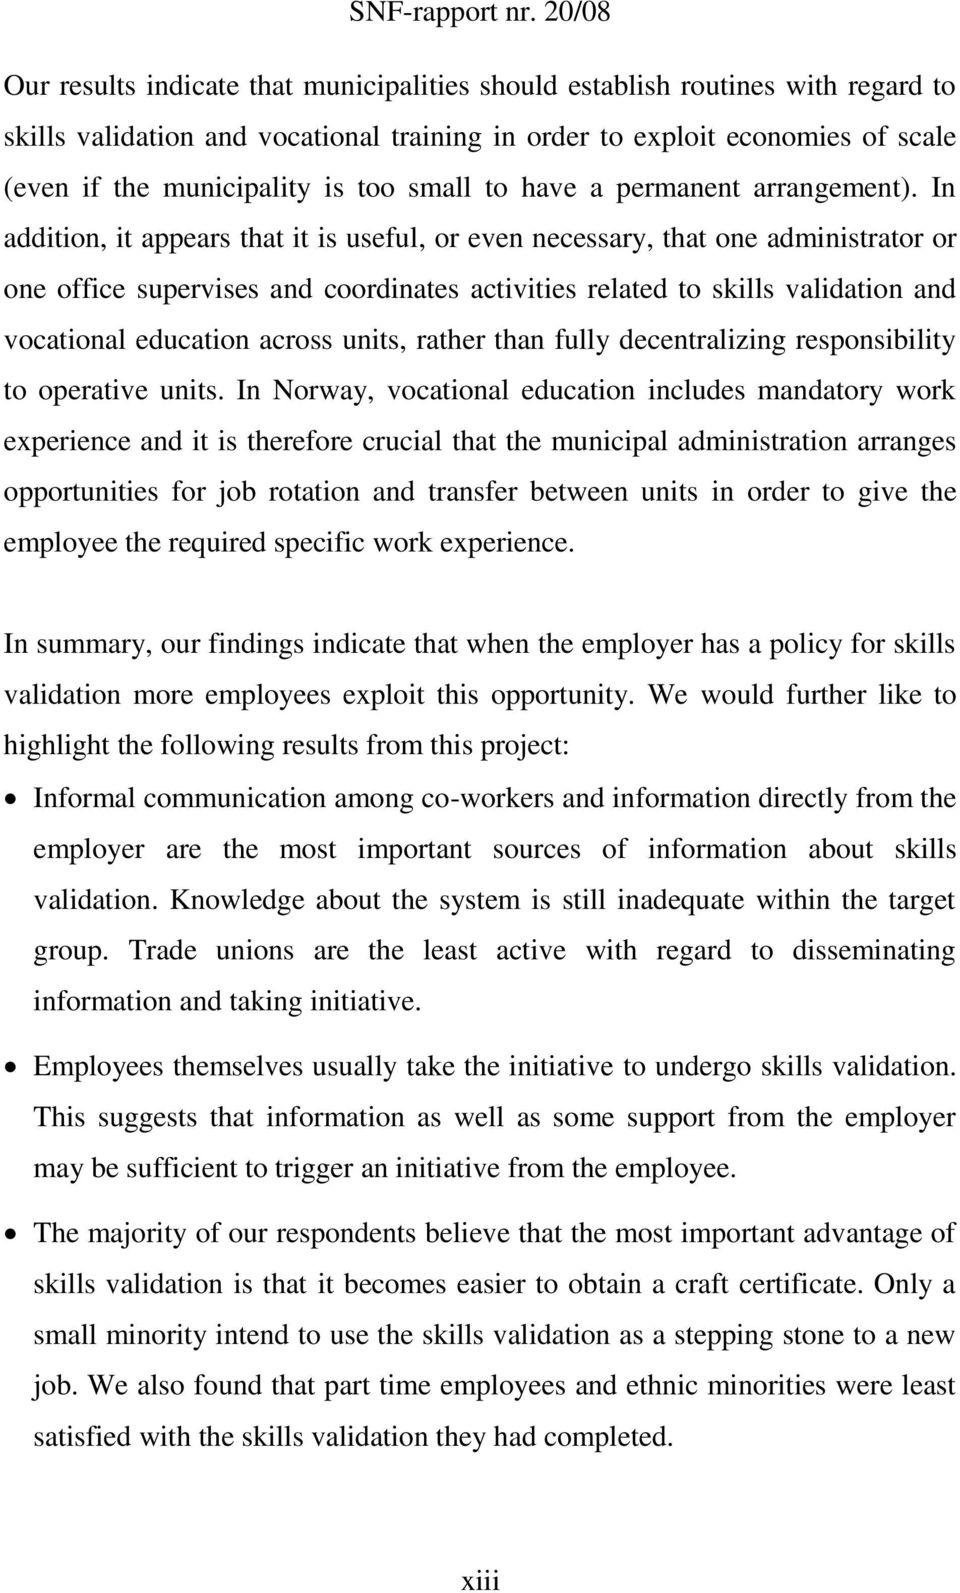 In addition, it appears that it is useful, or even necessary, that one administrator or one office supervises and coordinates activities related to skills validation and vocational education across